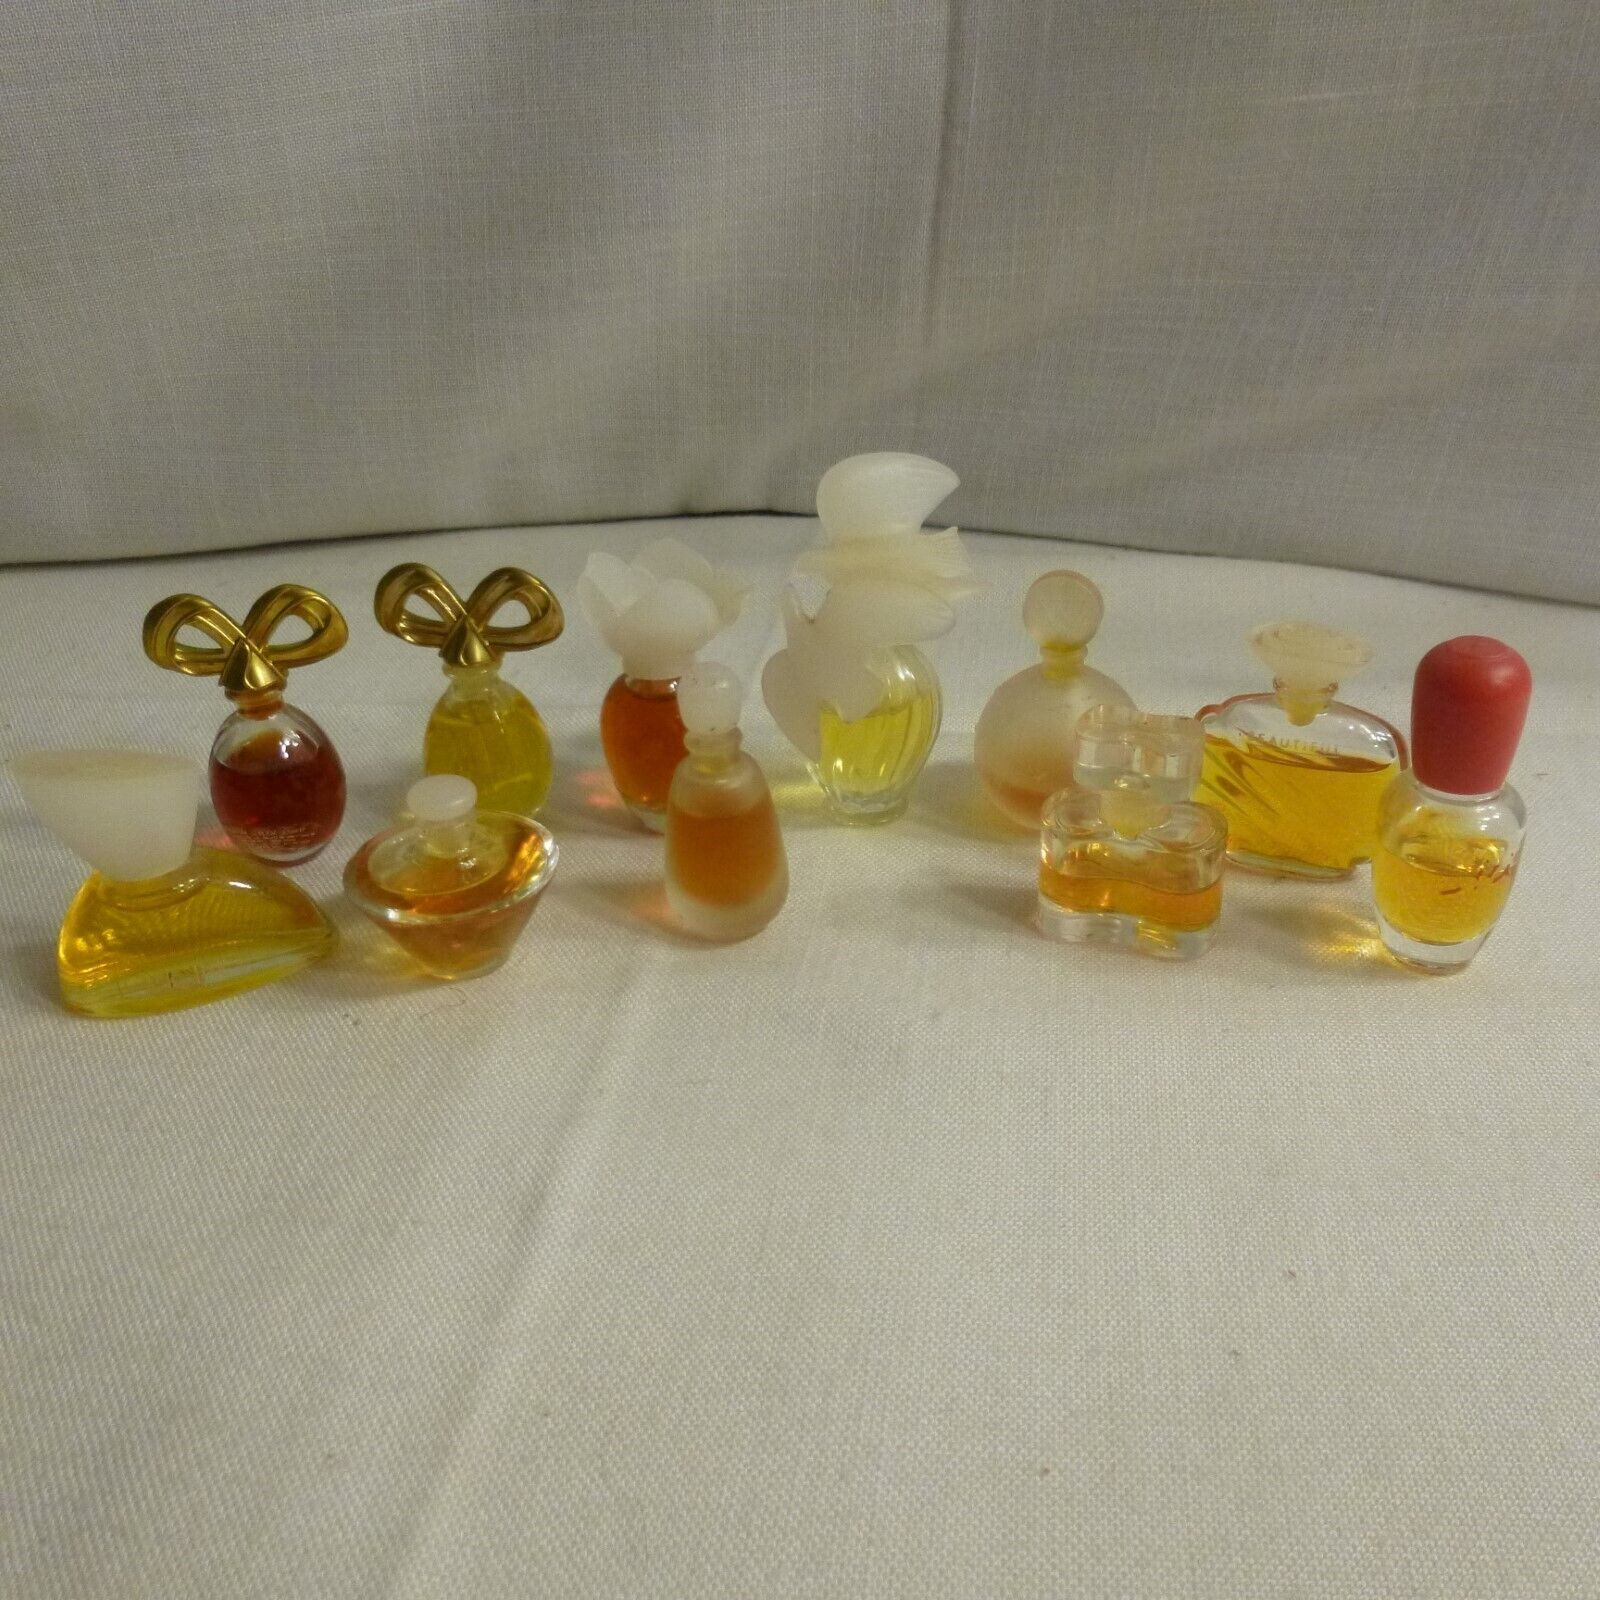 Lot of 11 Mini glass Perfume bottles - with Longing by Coty 1/8 oz Perfume - EuC